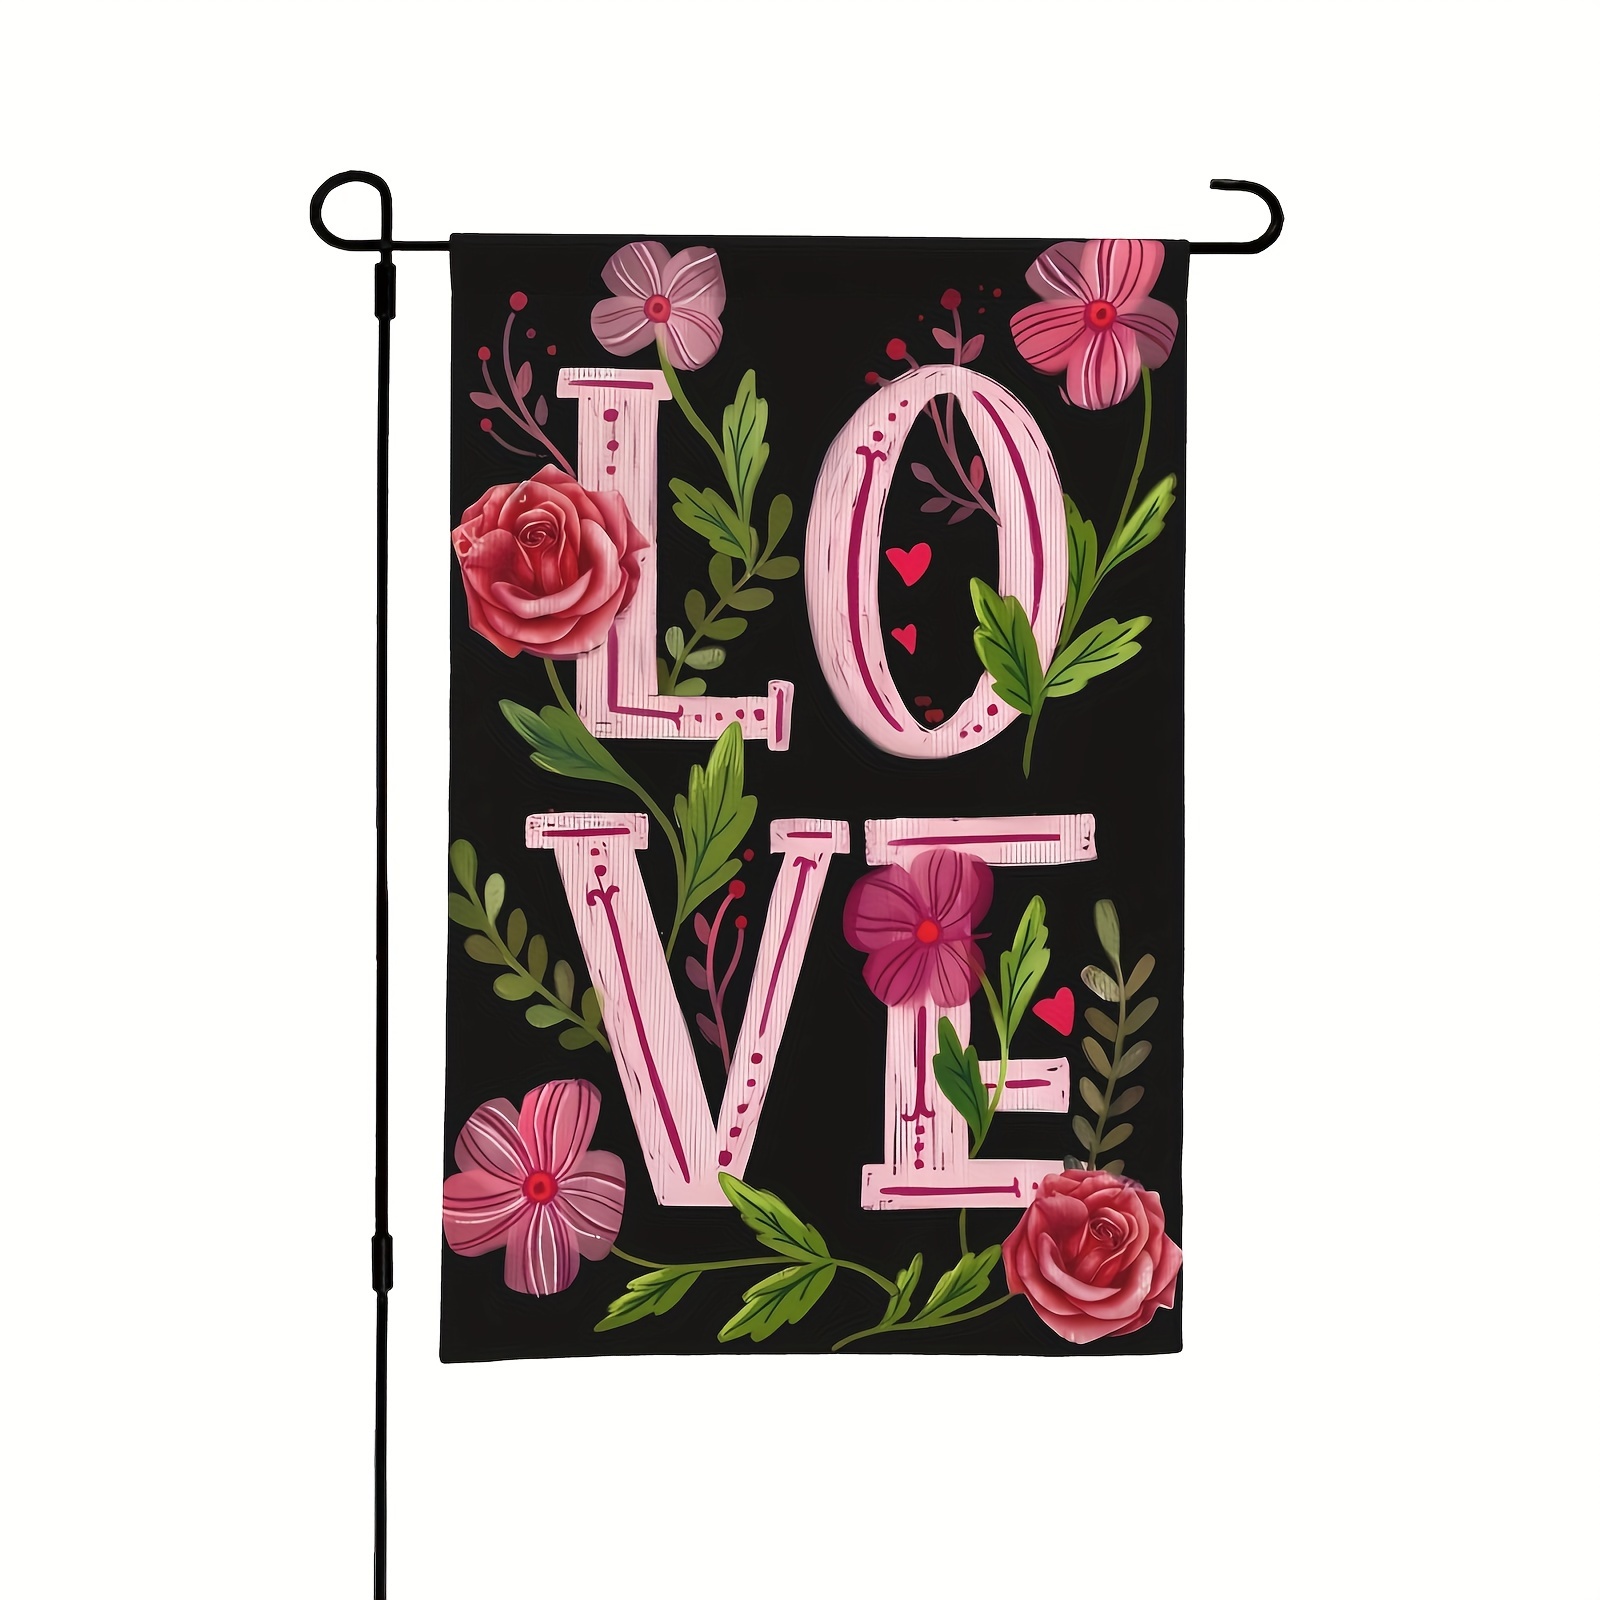 I Love Heart Boobies Flag 3x5 Outdoor Double Sided Funny Flag Wall Decor  For Party 3x5 Ft, I Love Heart Boobies Tapestry For Wall Hanging